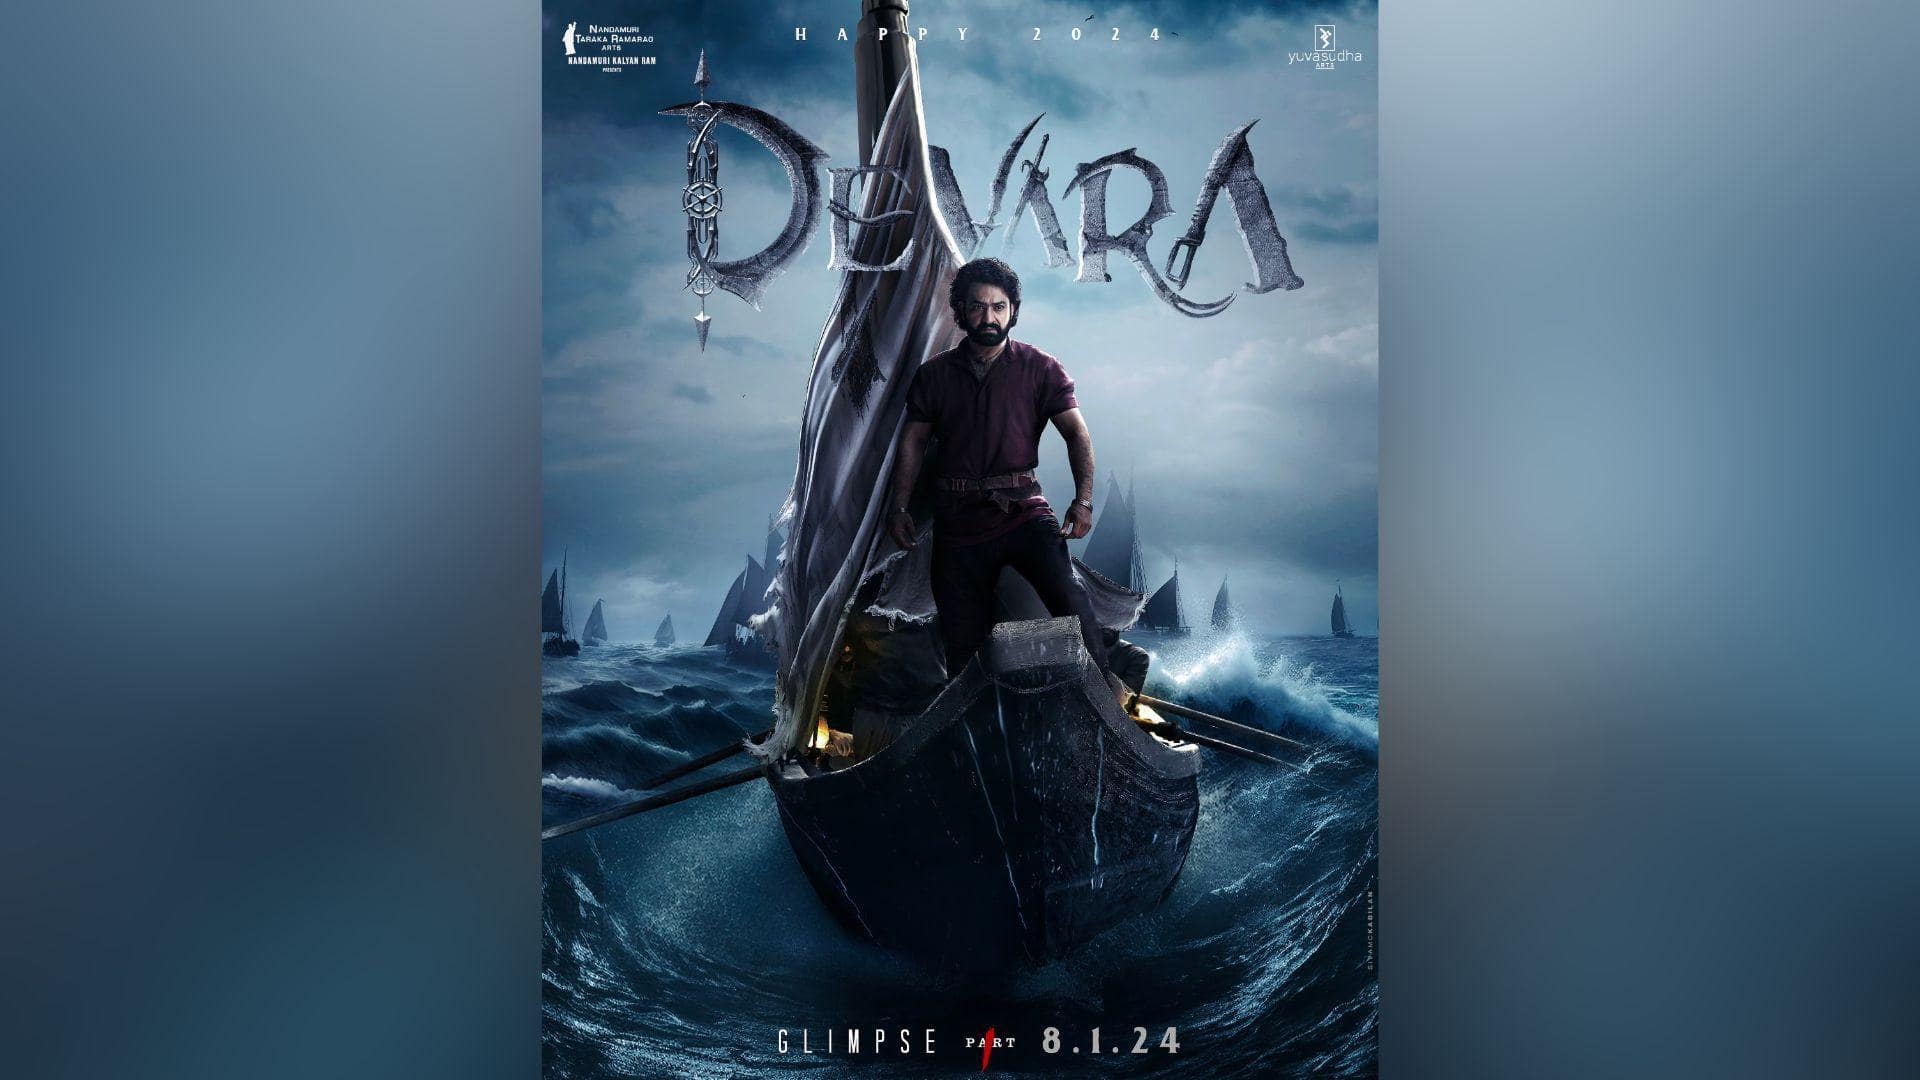 Jr. NTR unveils 'Devara' poster, first-glimpse coming soon